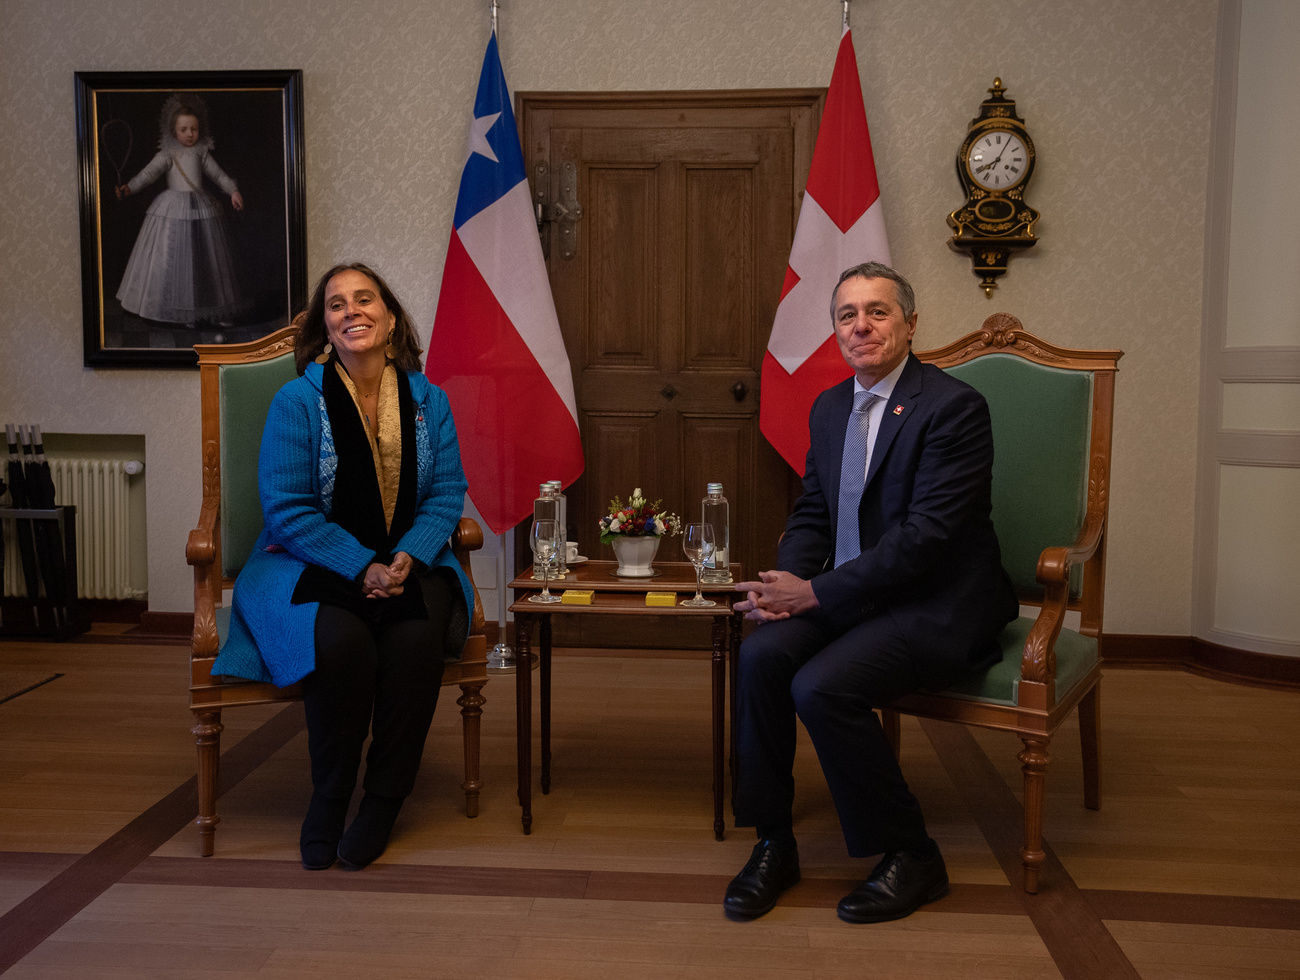 foreign ministers of Chile and Switzerland posing for photographer